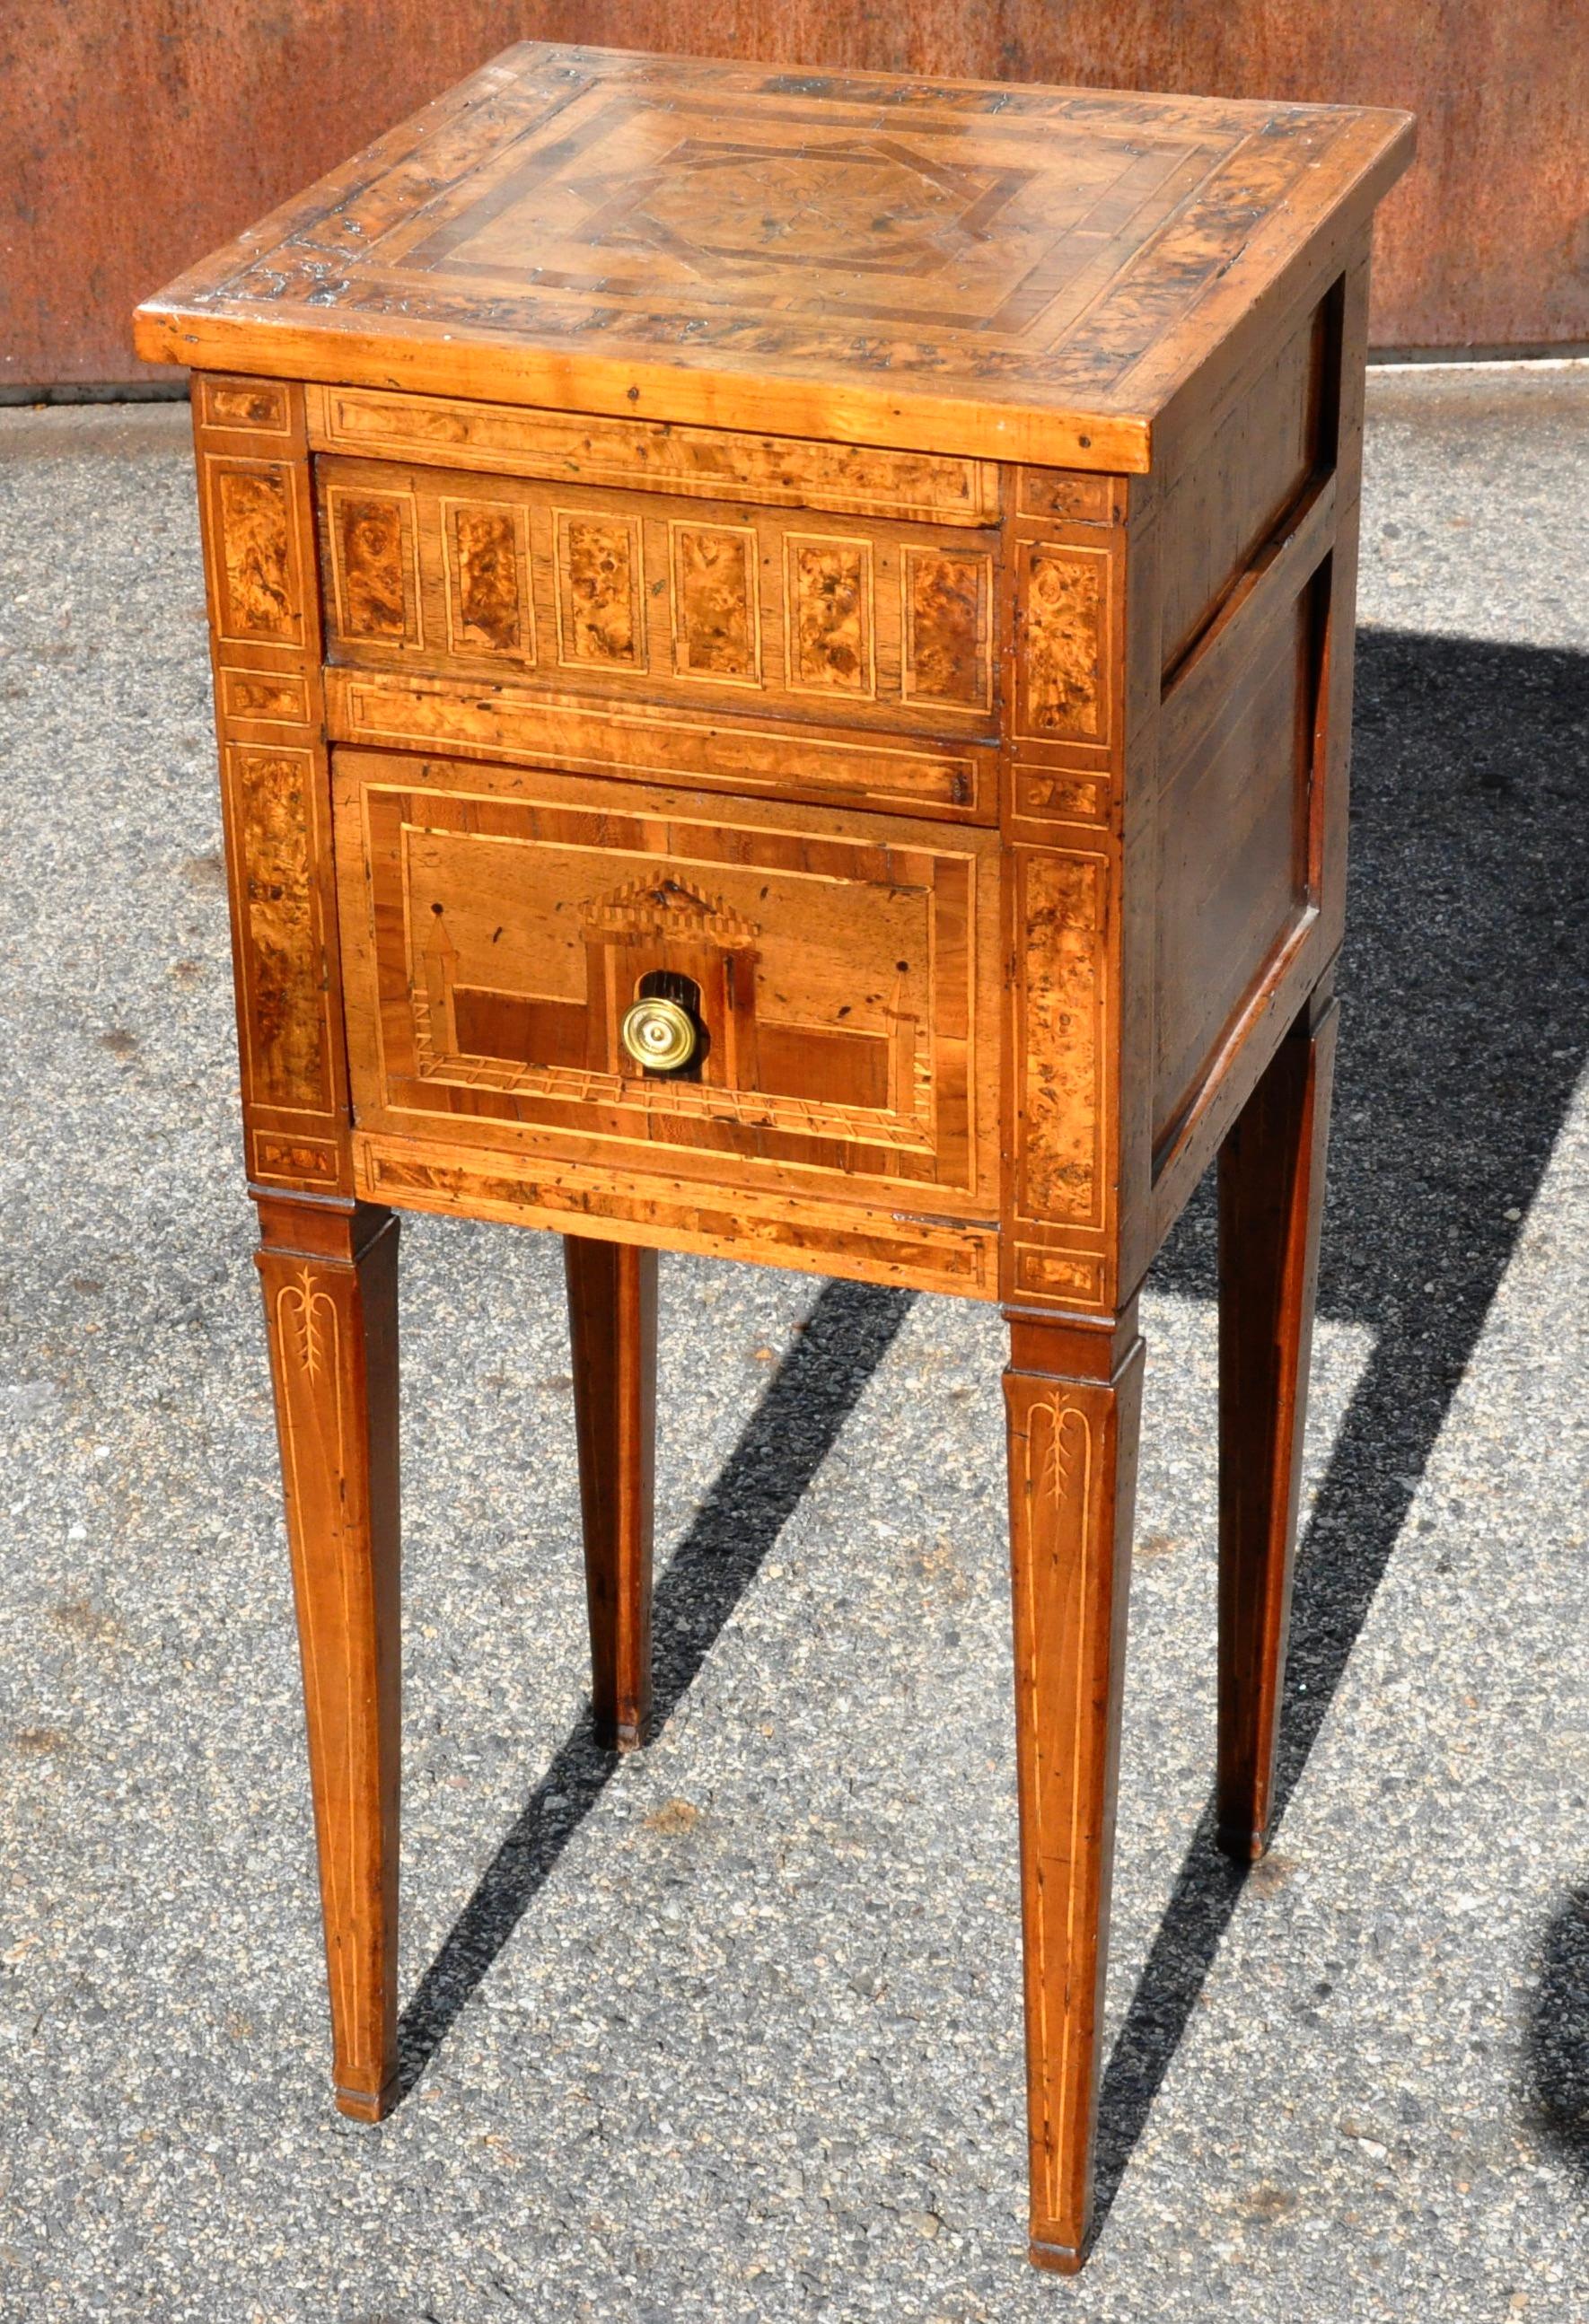 Rare attributed Maggiolini small commode or bedside table with architectural marquetry. Front inlaid and sides inlaid with three different villas. The best version of this master cabinetmaker is to find original architectural representation.